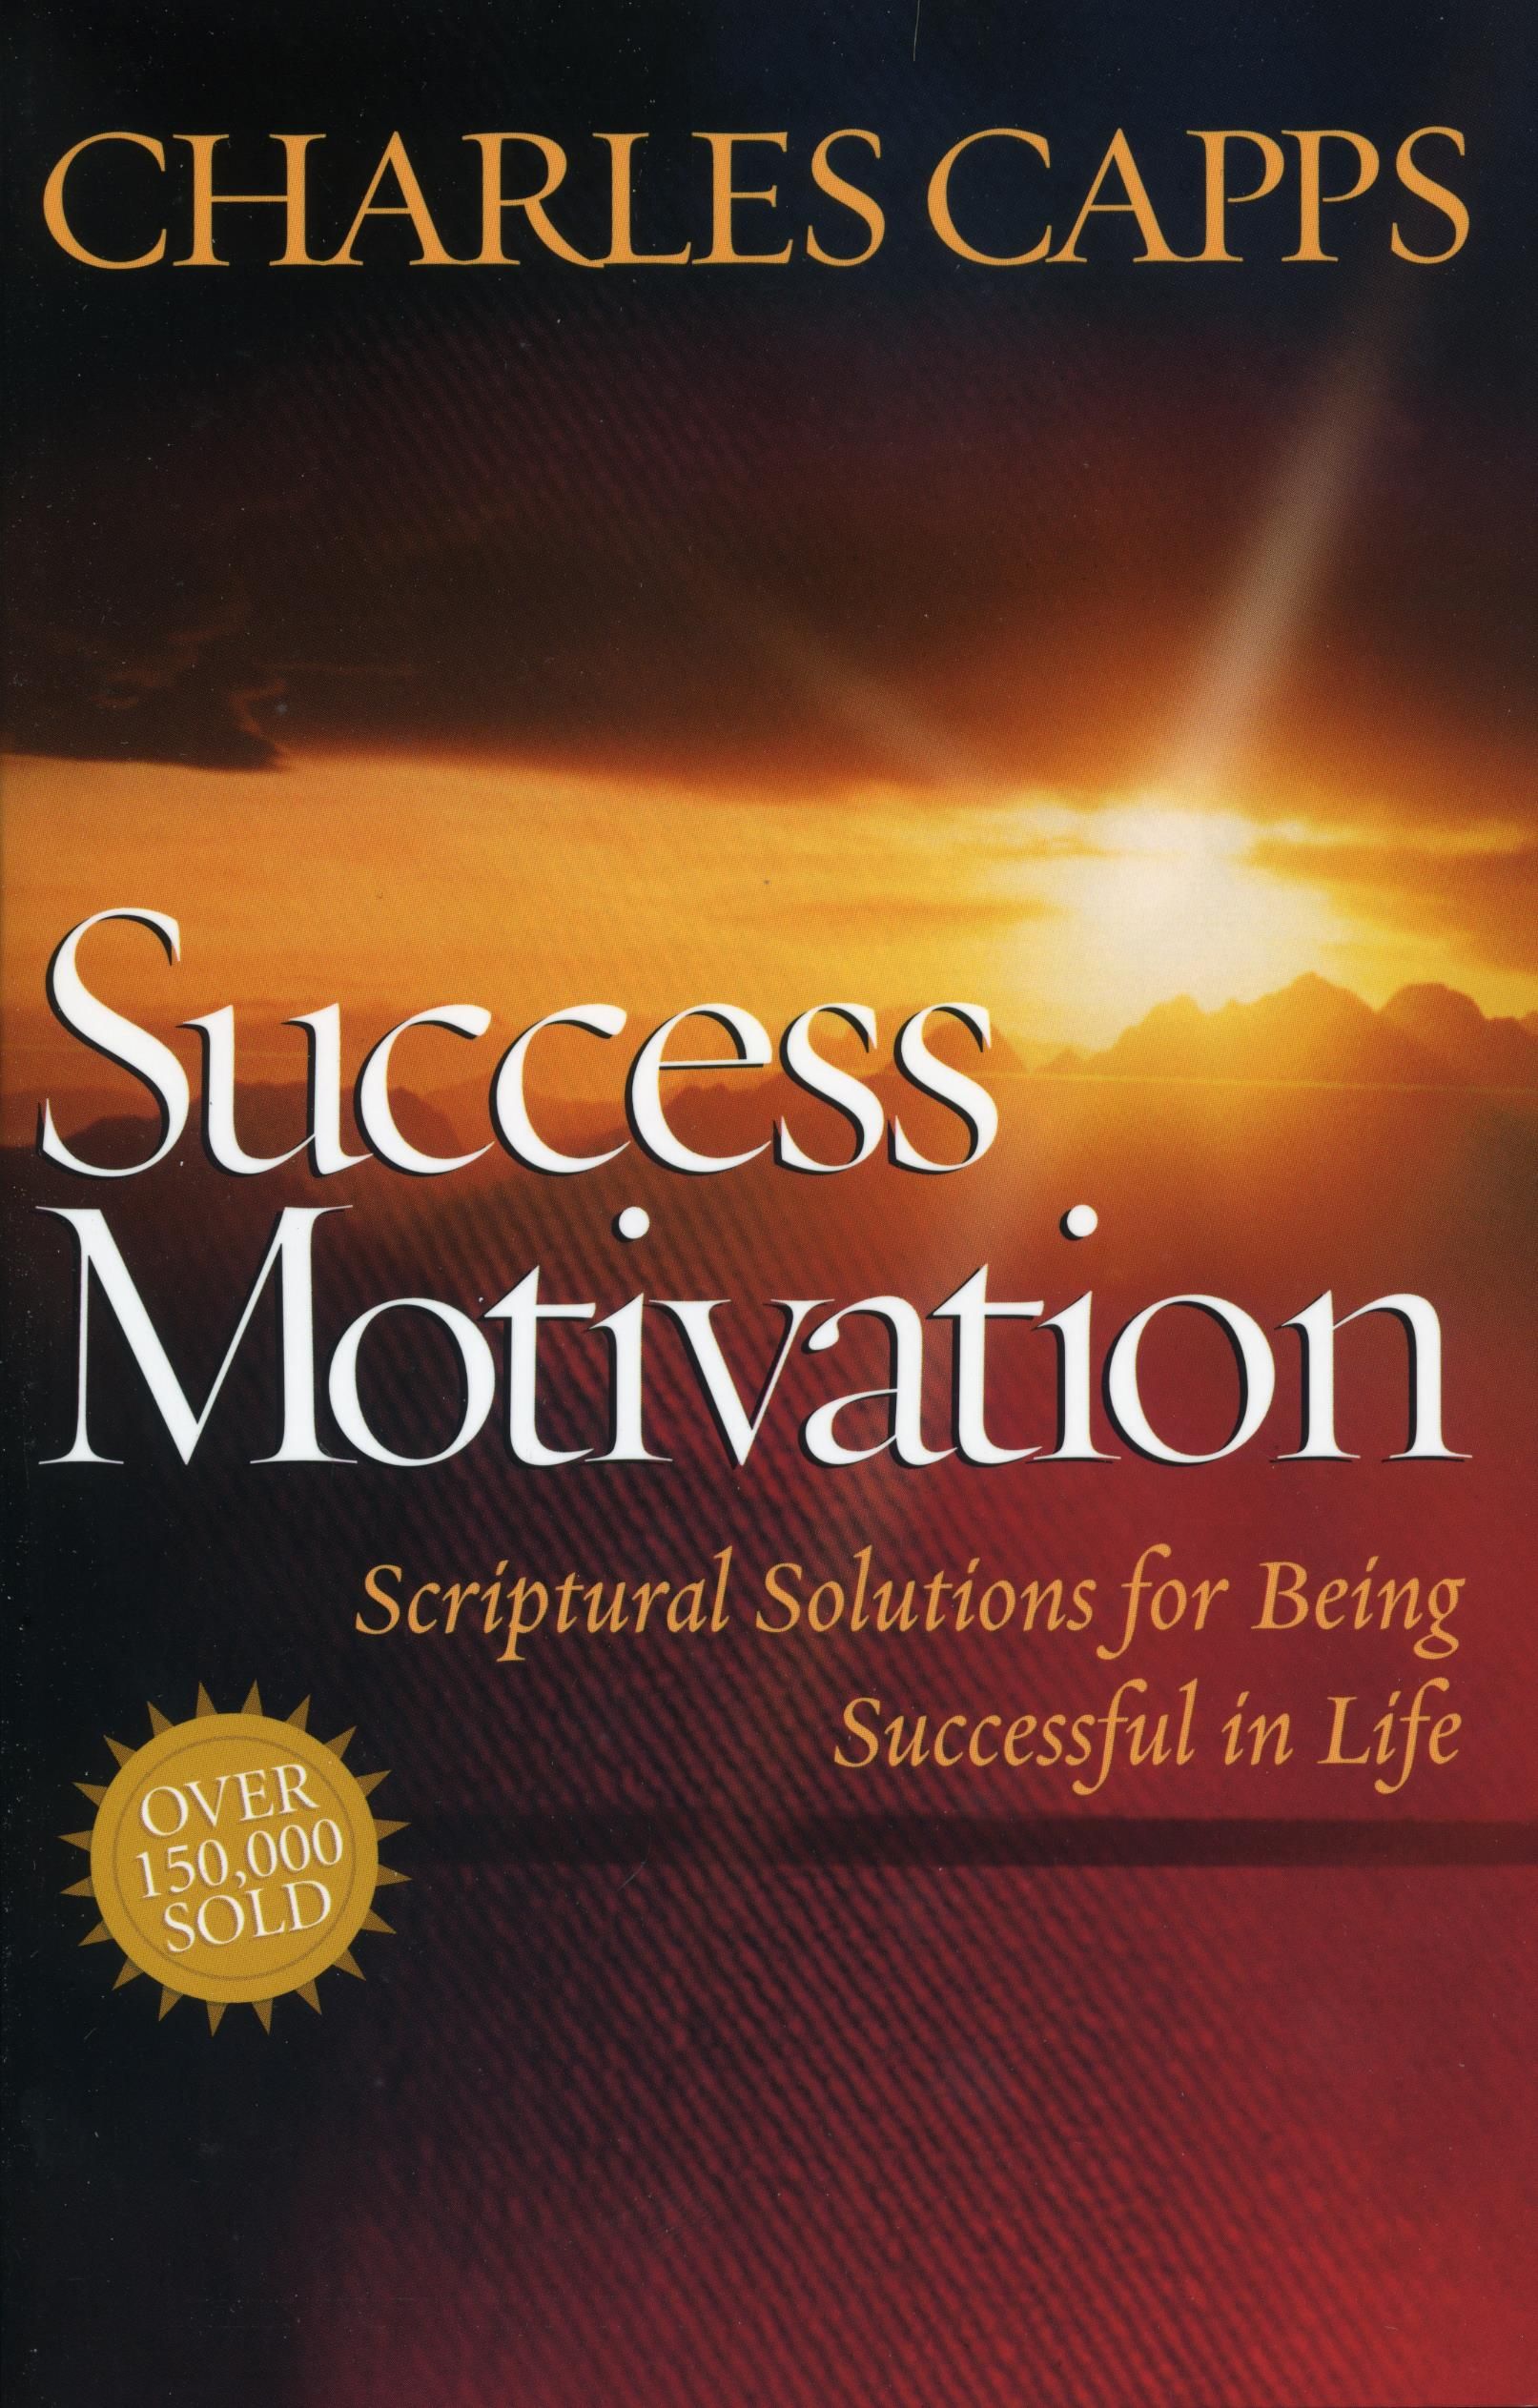 Charles Capps: Success Motivation through the Word